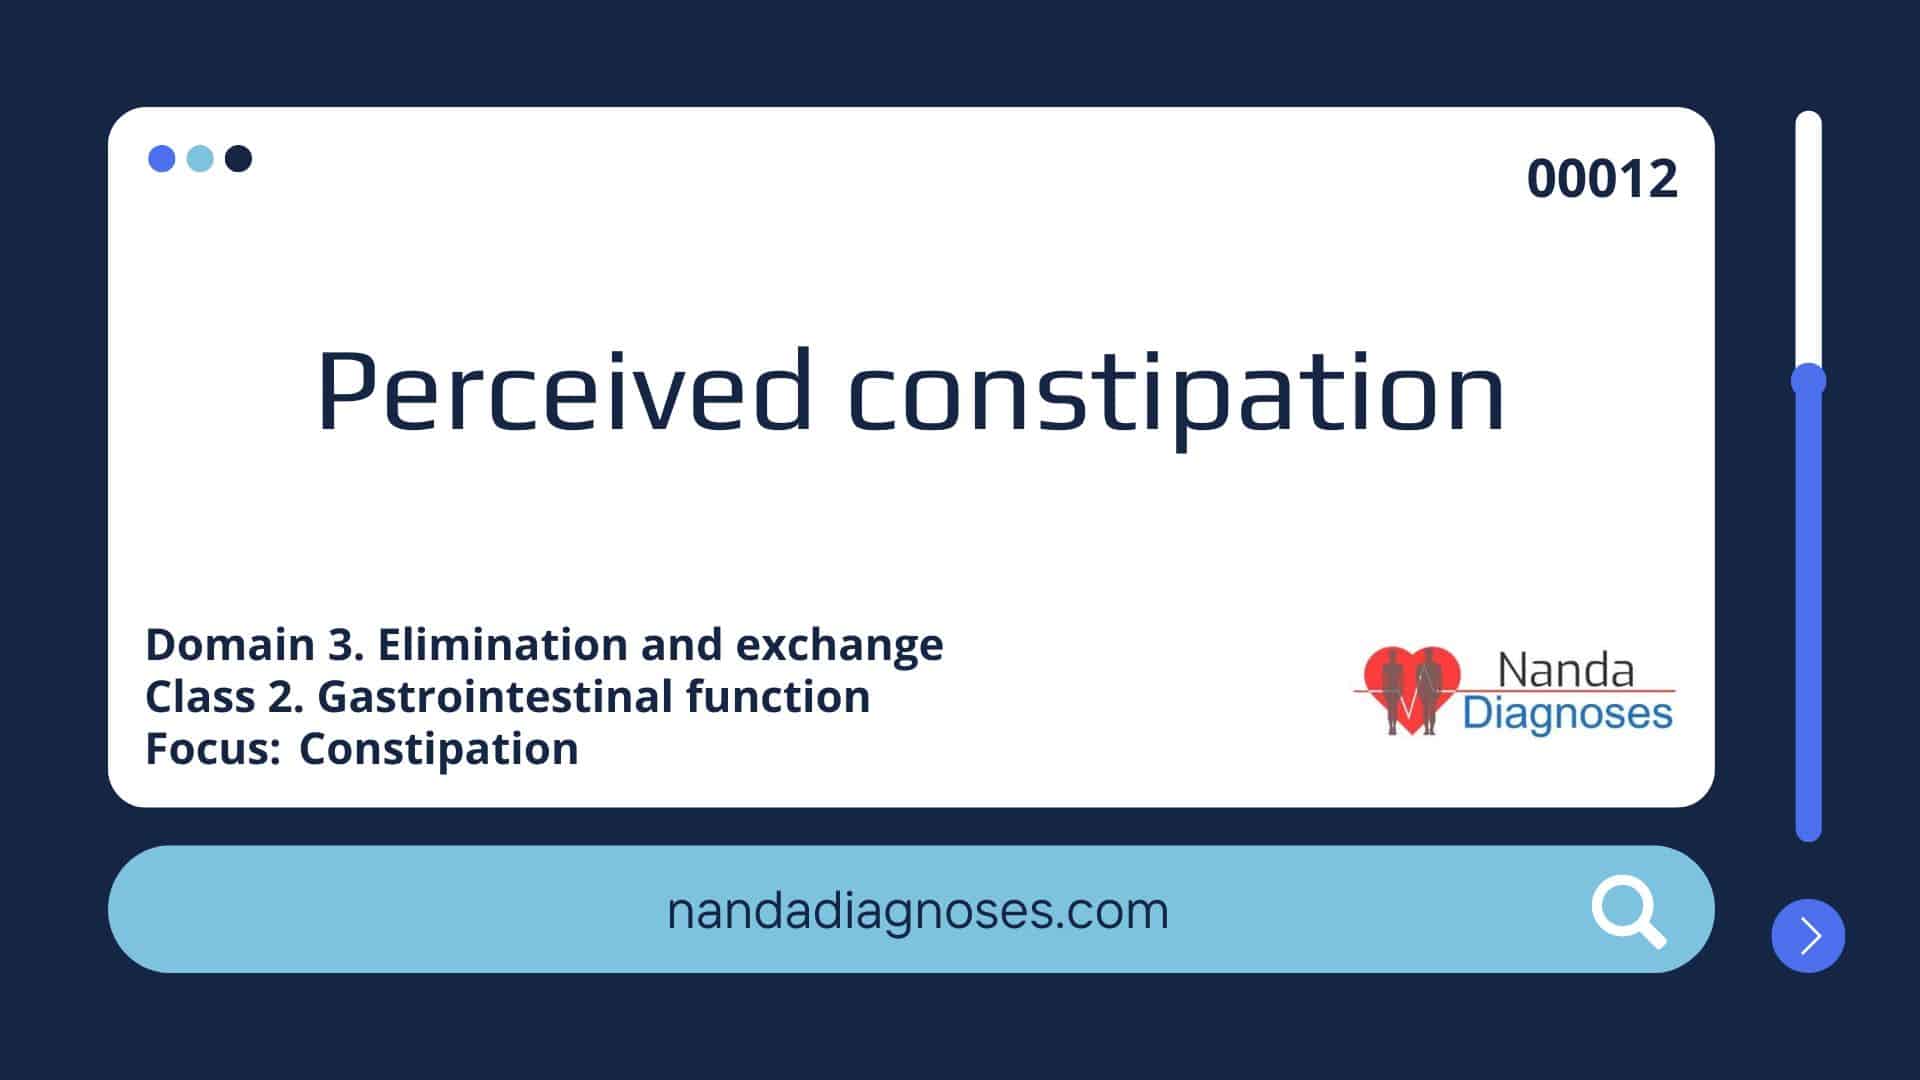 Perceived constipation